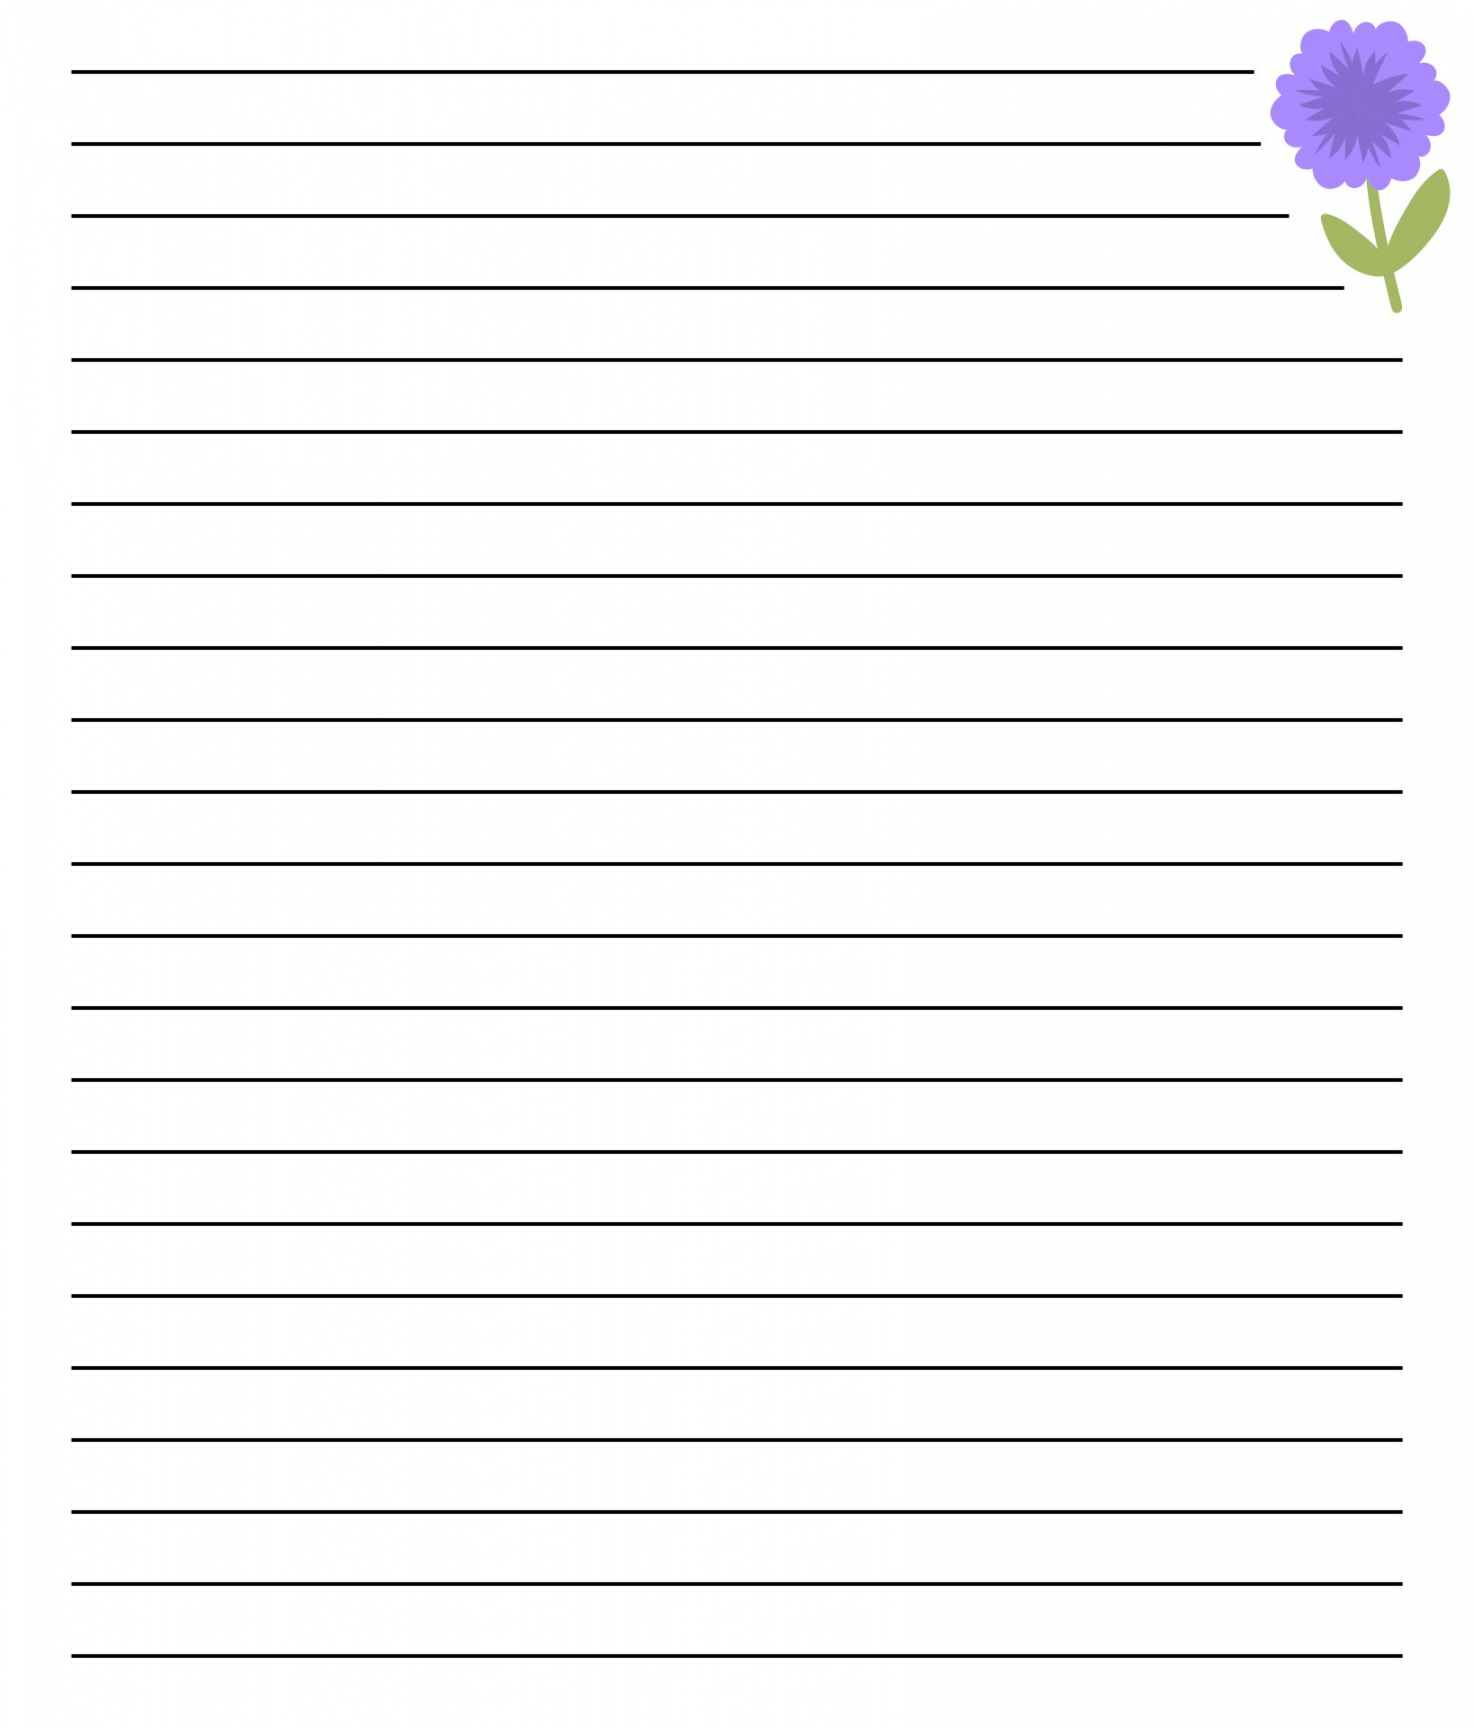 Best Printable Lined Stationery - printablee - Free Printable Stationary With Lines And Borders